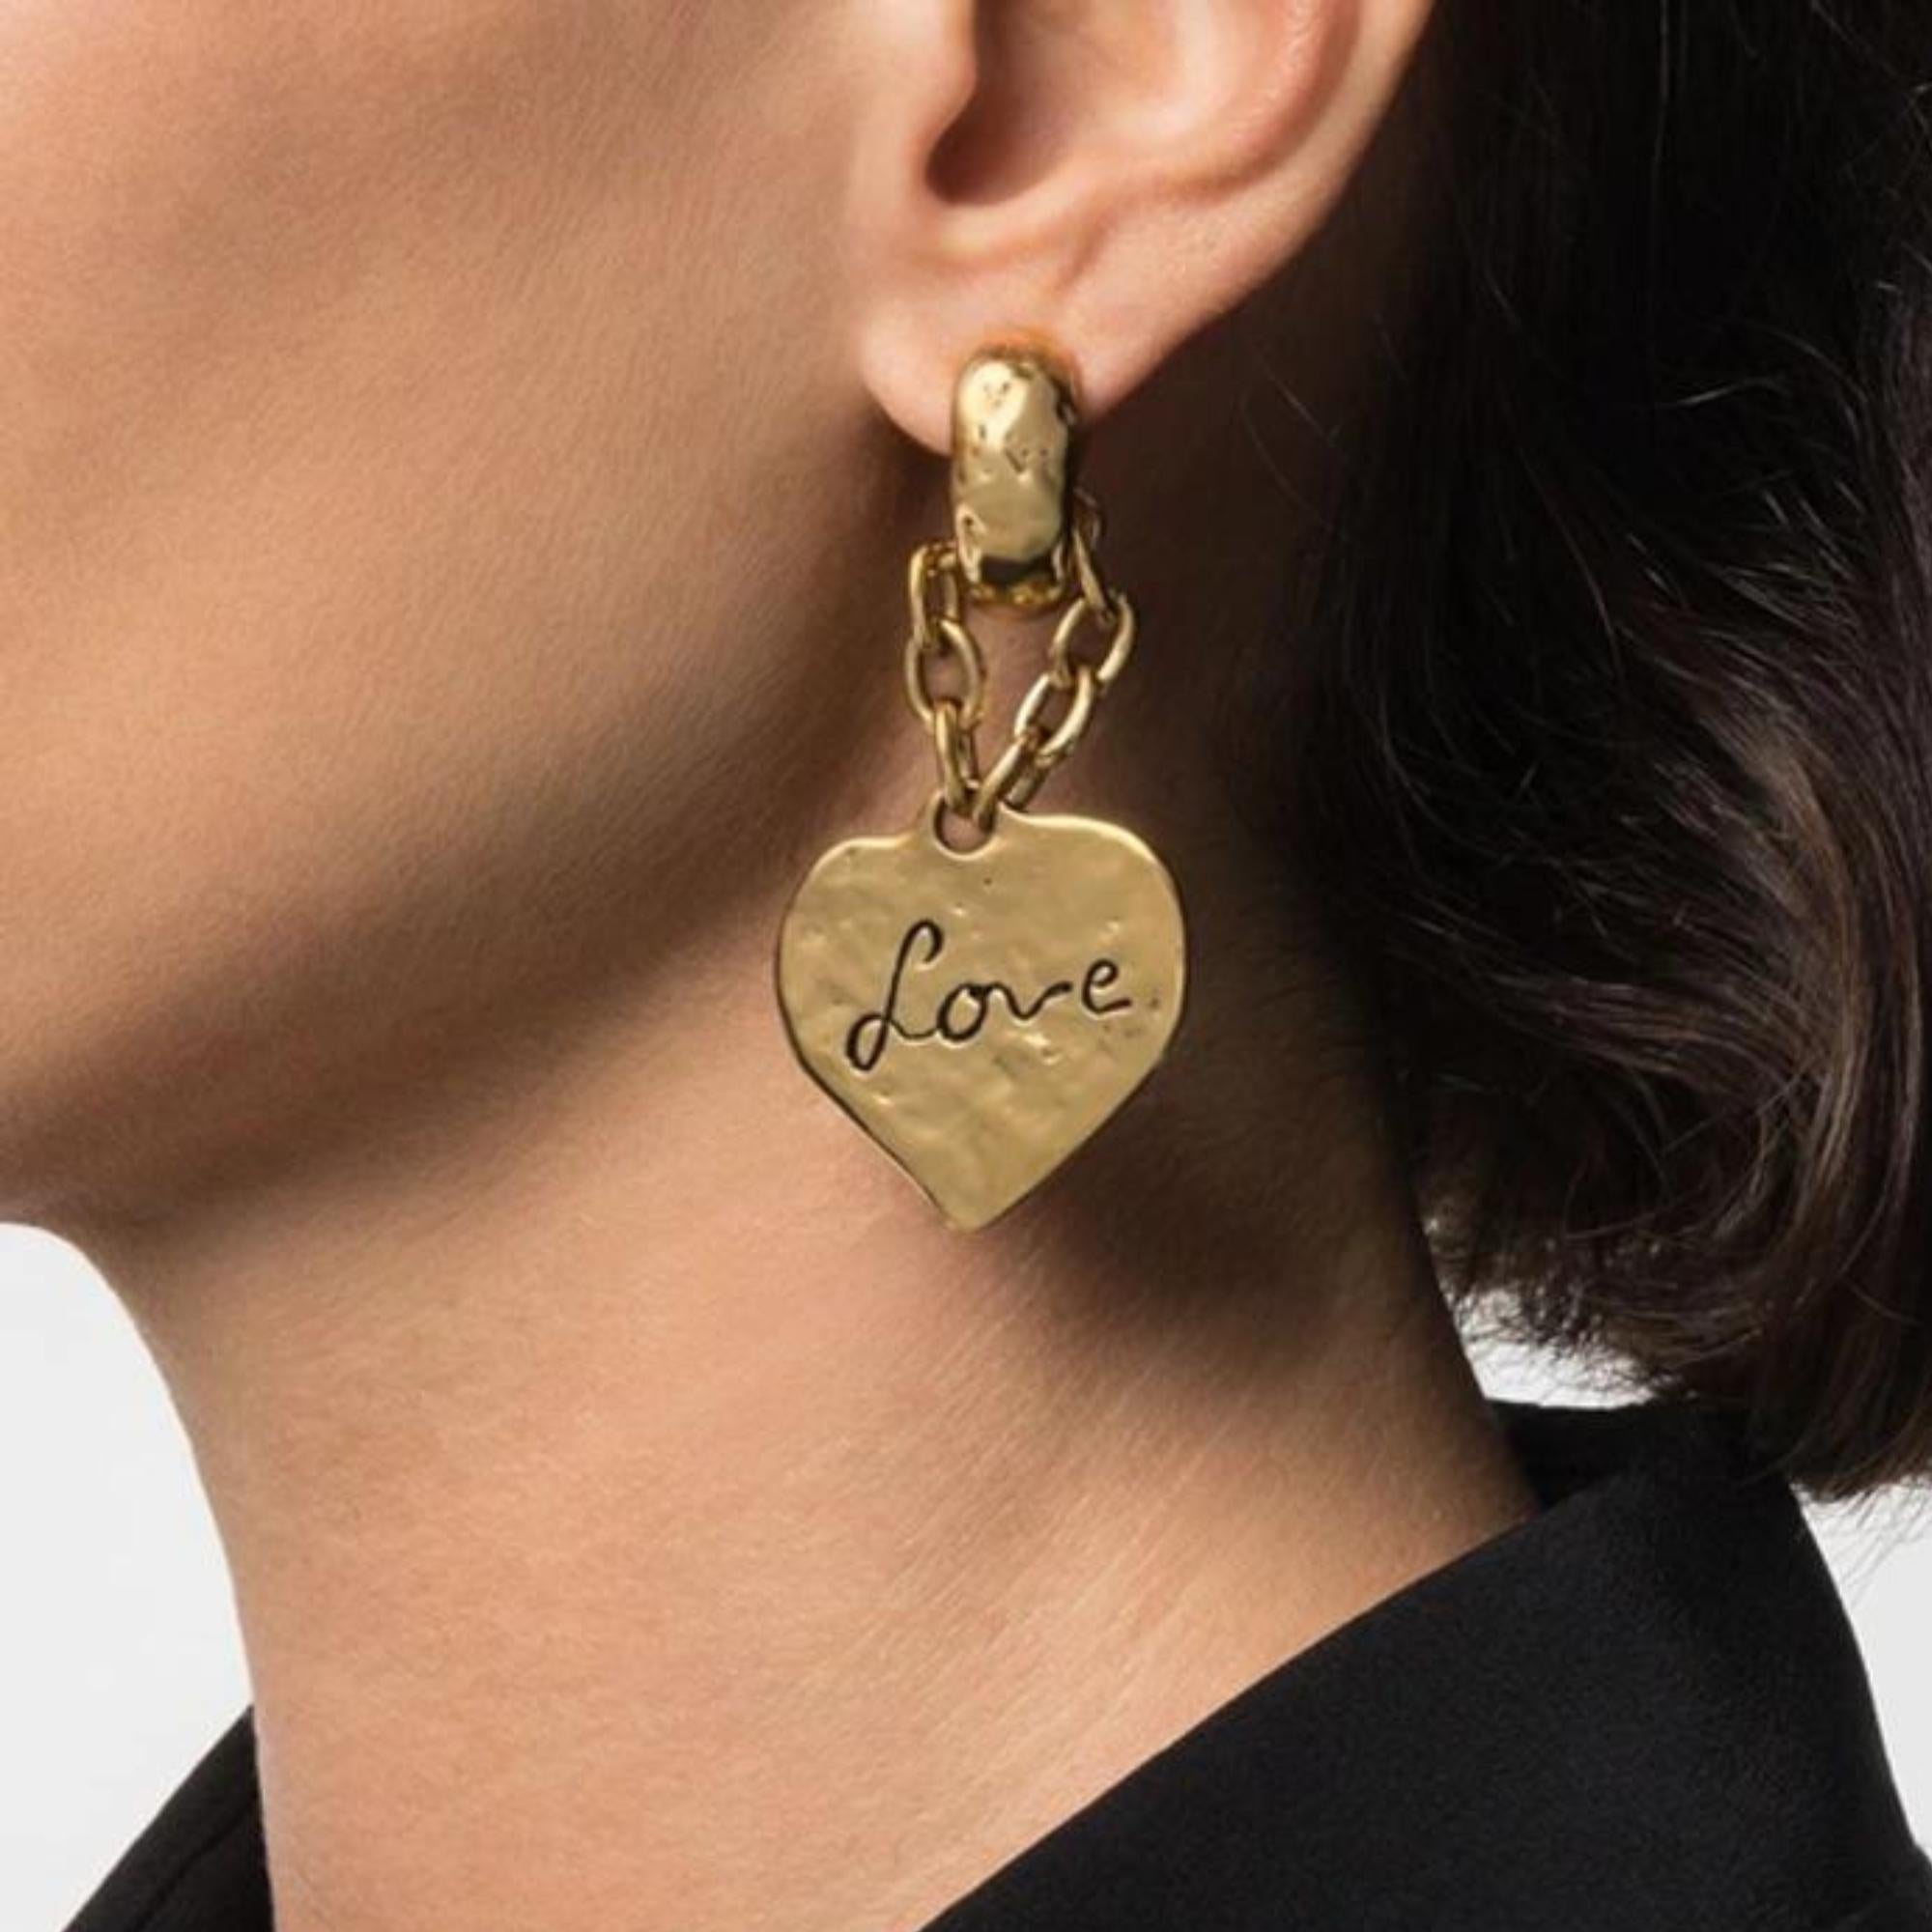 Gold-tone clip-on earrings from Saint Laurent. Made in metal with an antiqued gold finish and feature an embossed logo, a heart shape and “love